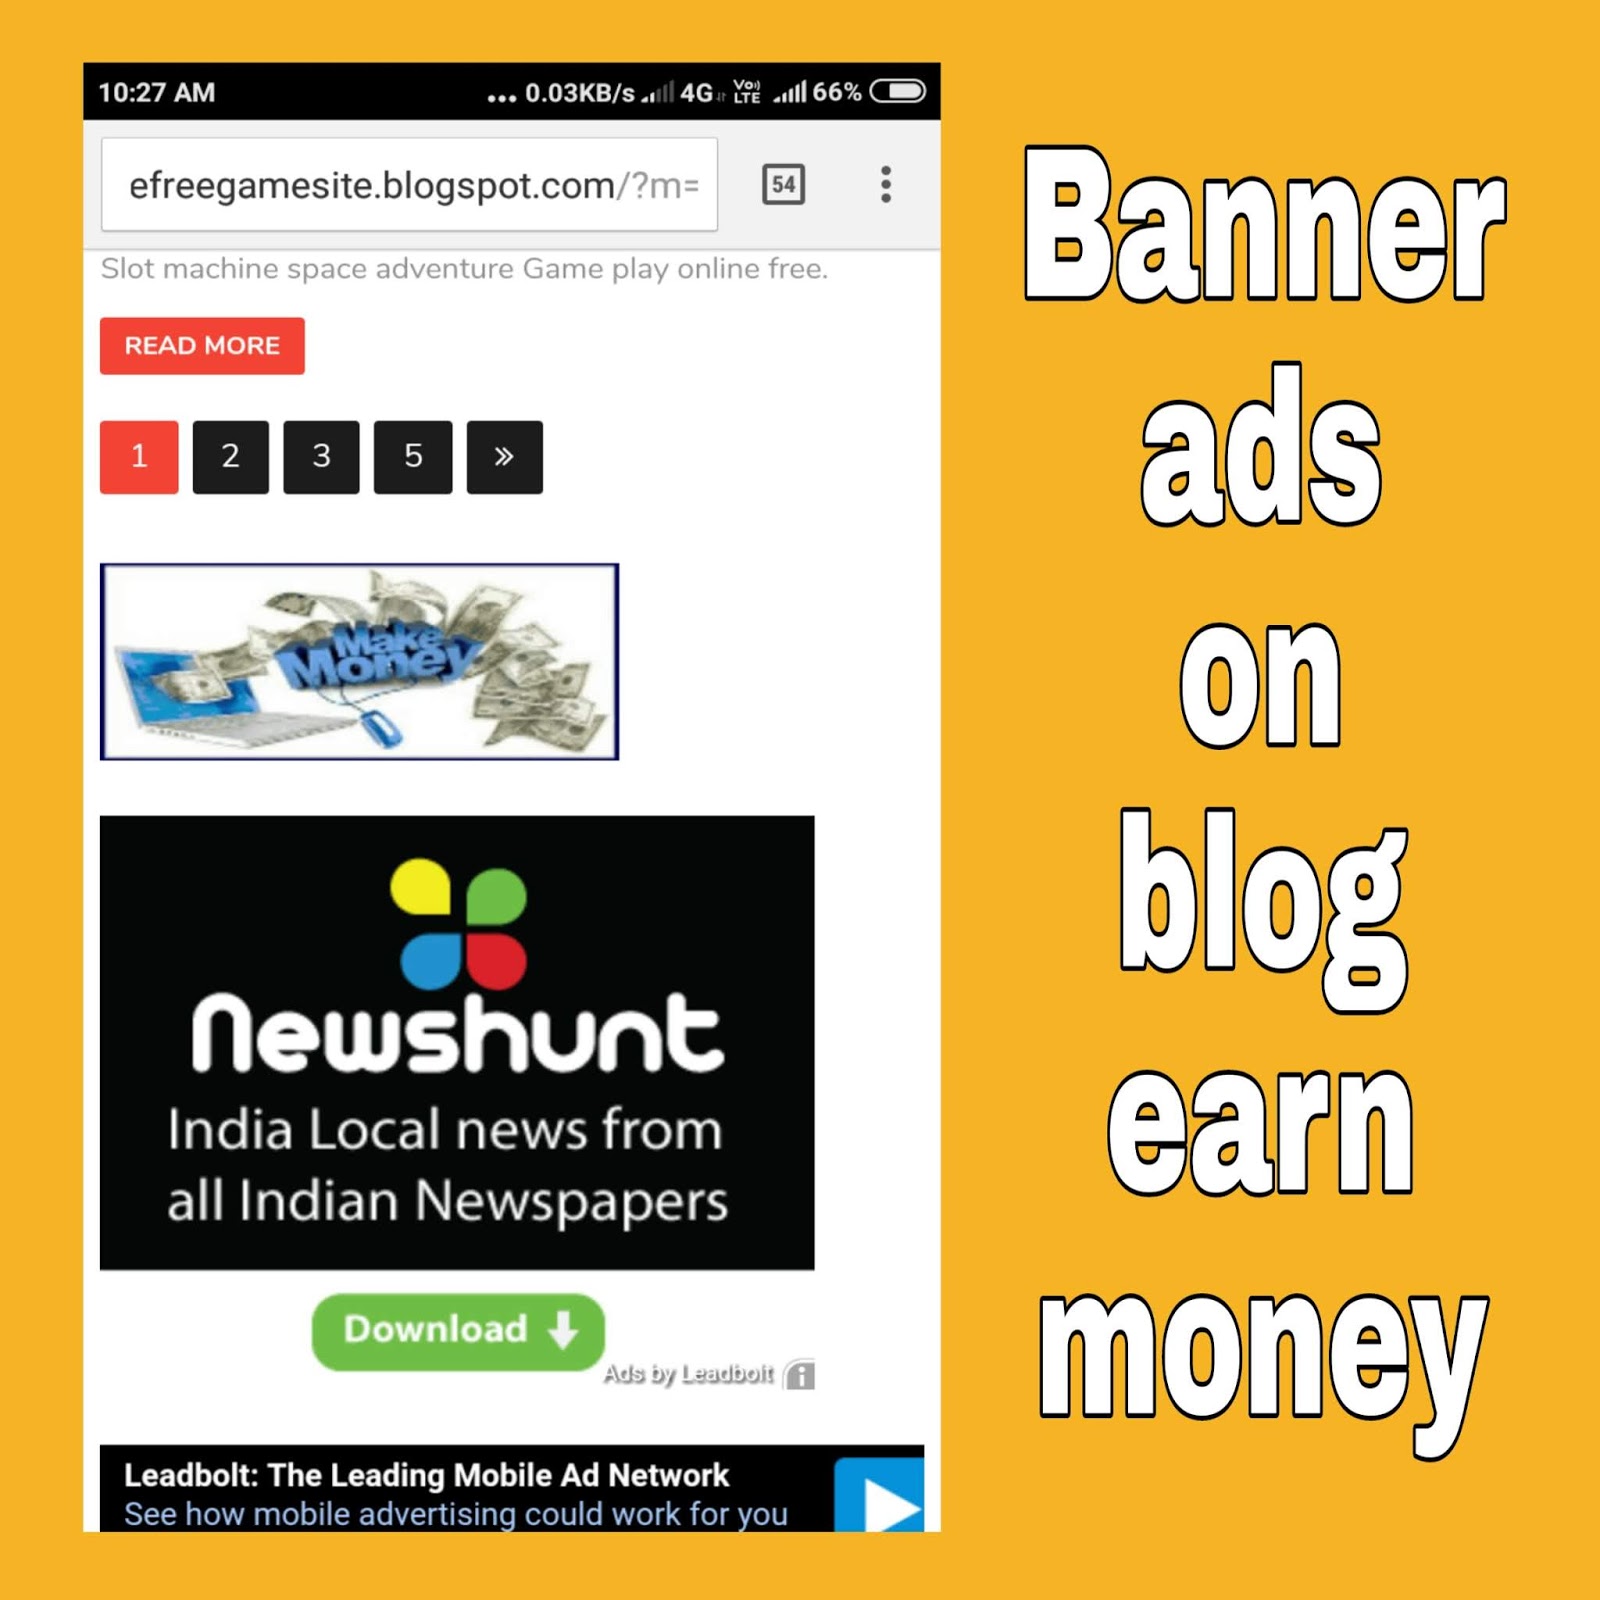 how to make money on blogger without adsense